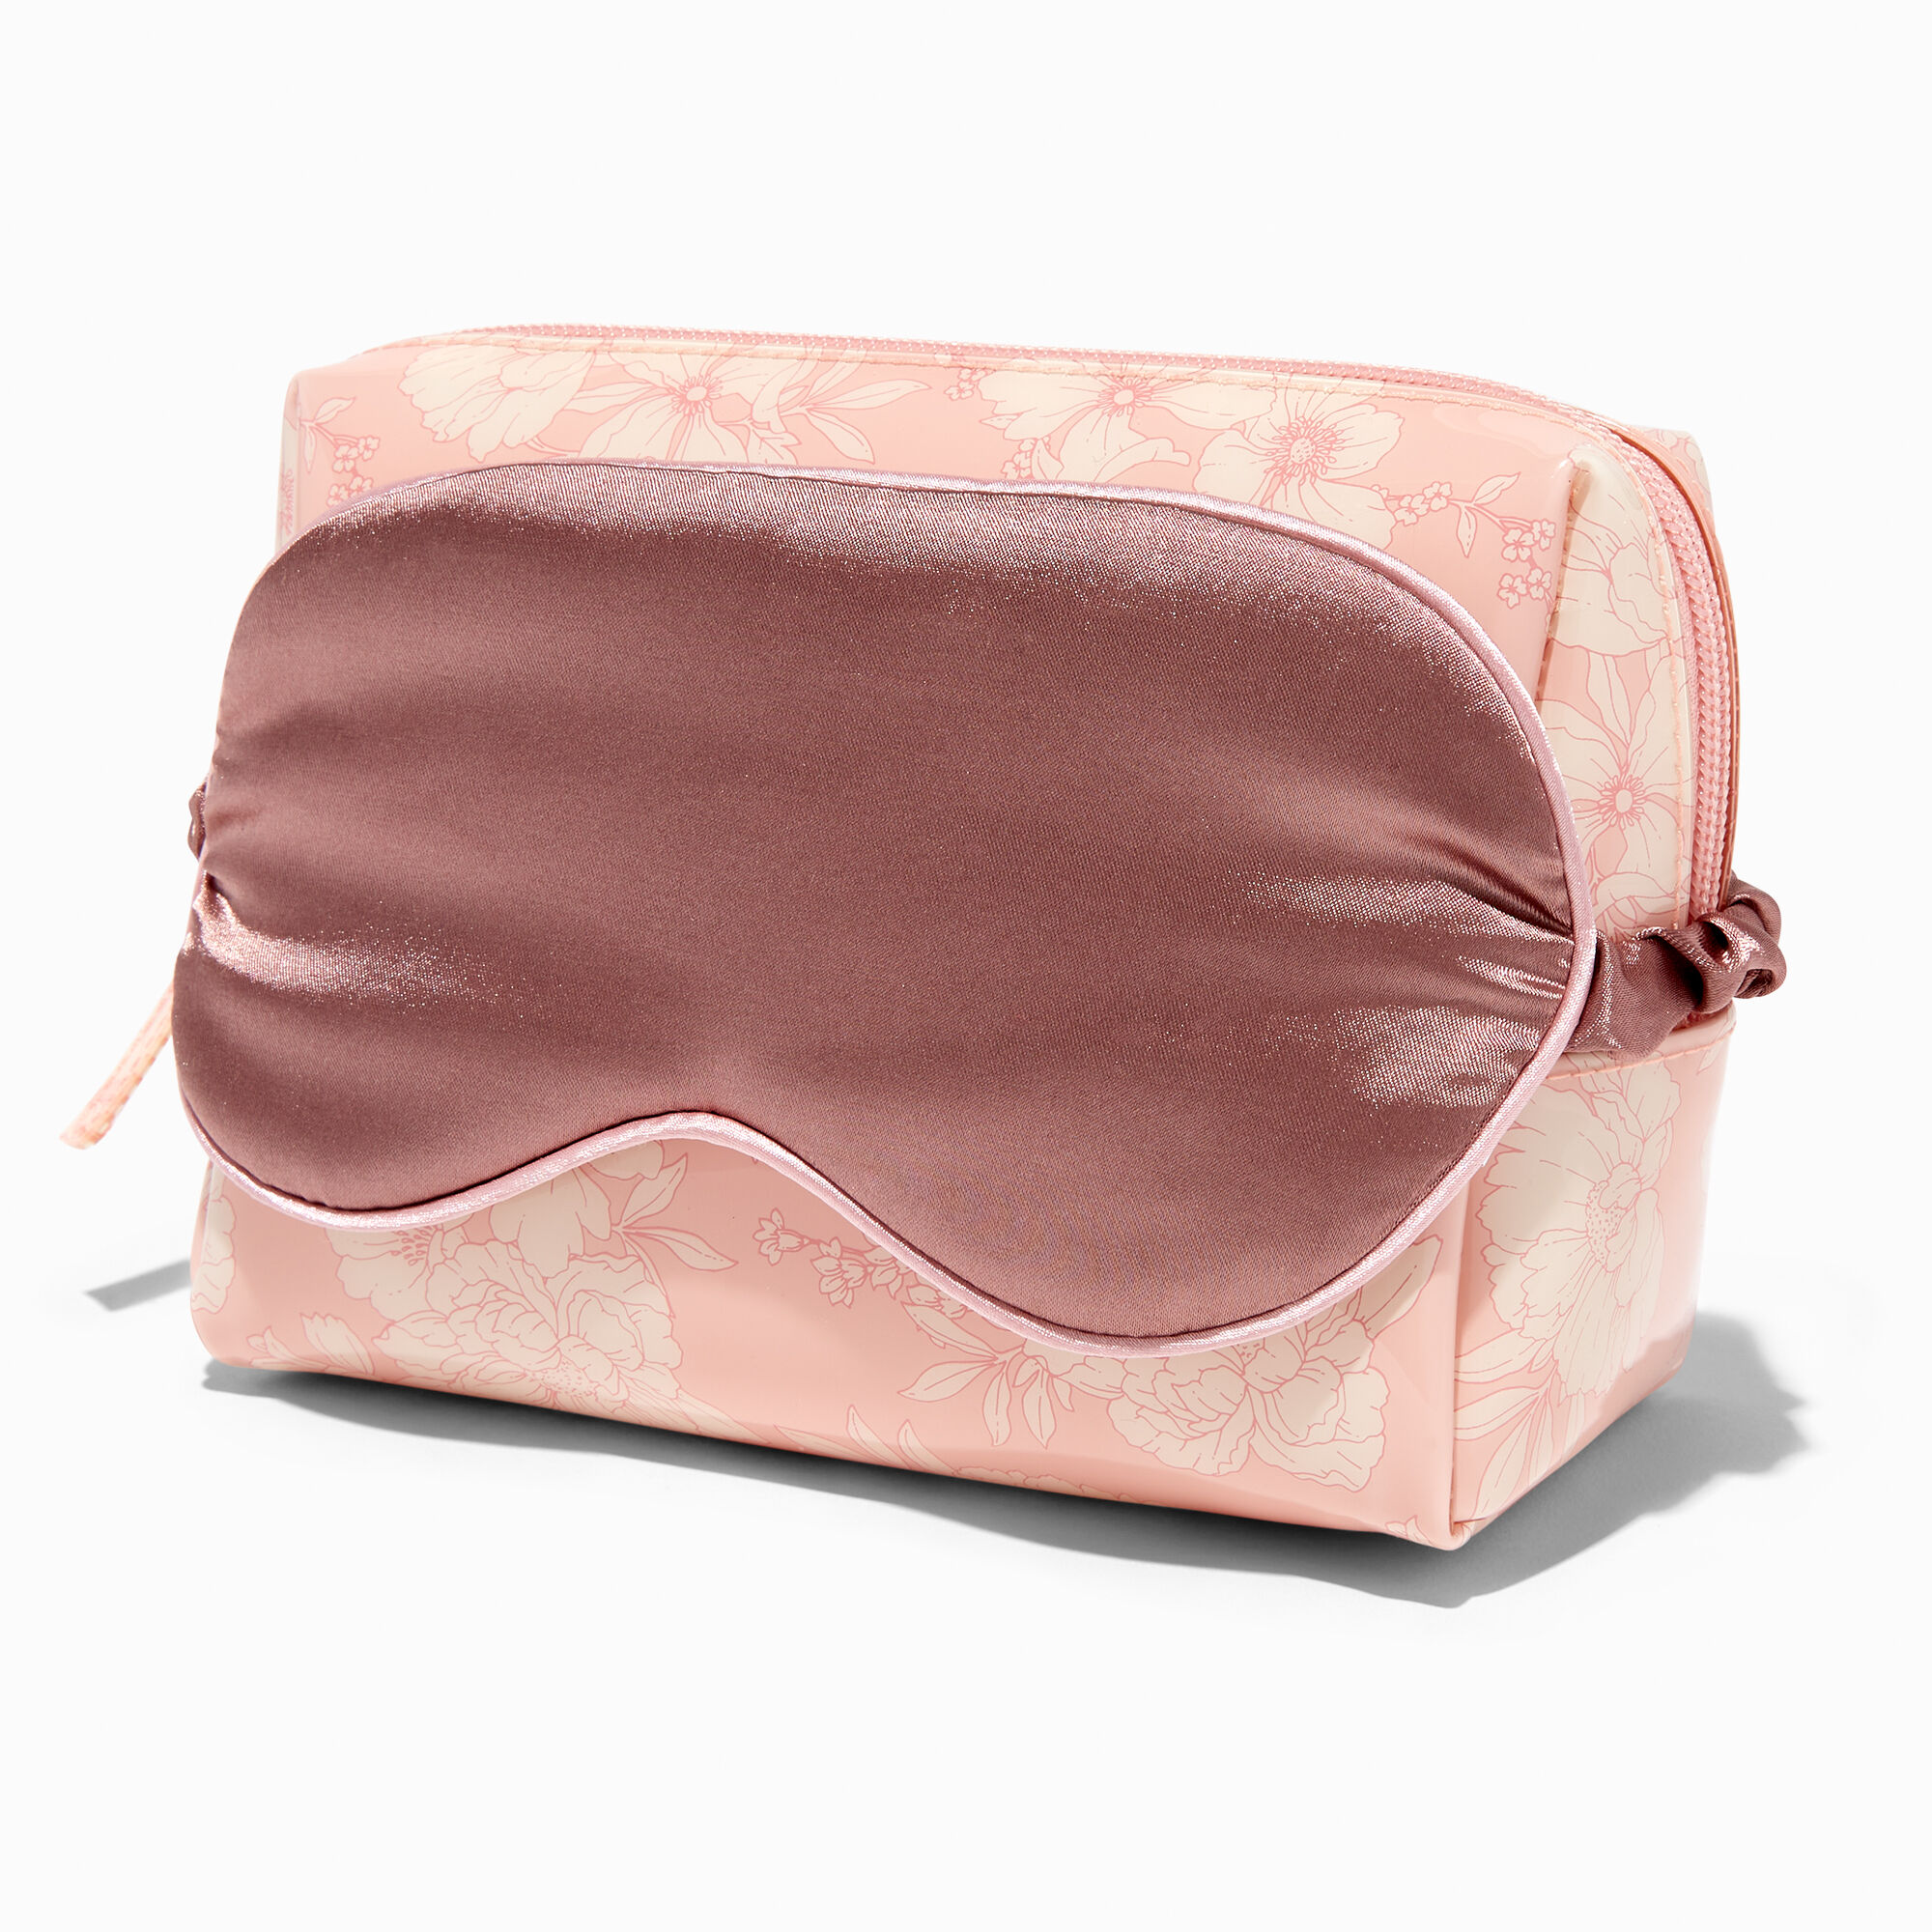 View Claires Medium Floral Makeup Bag With Sleeping Mask Pink information